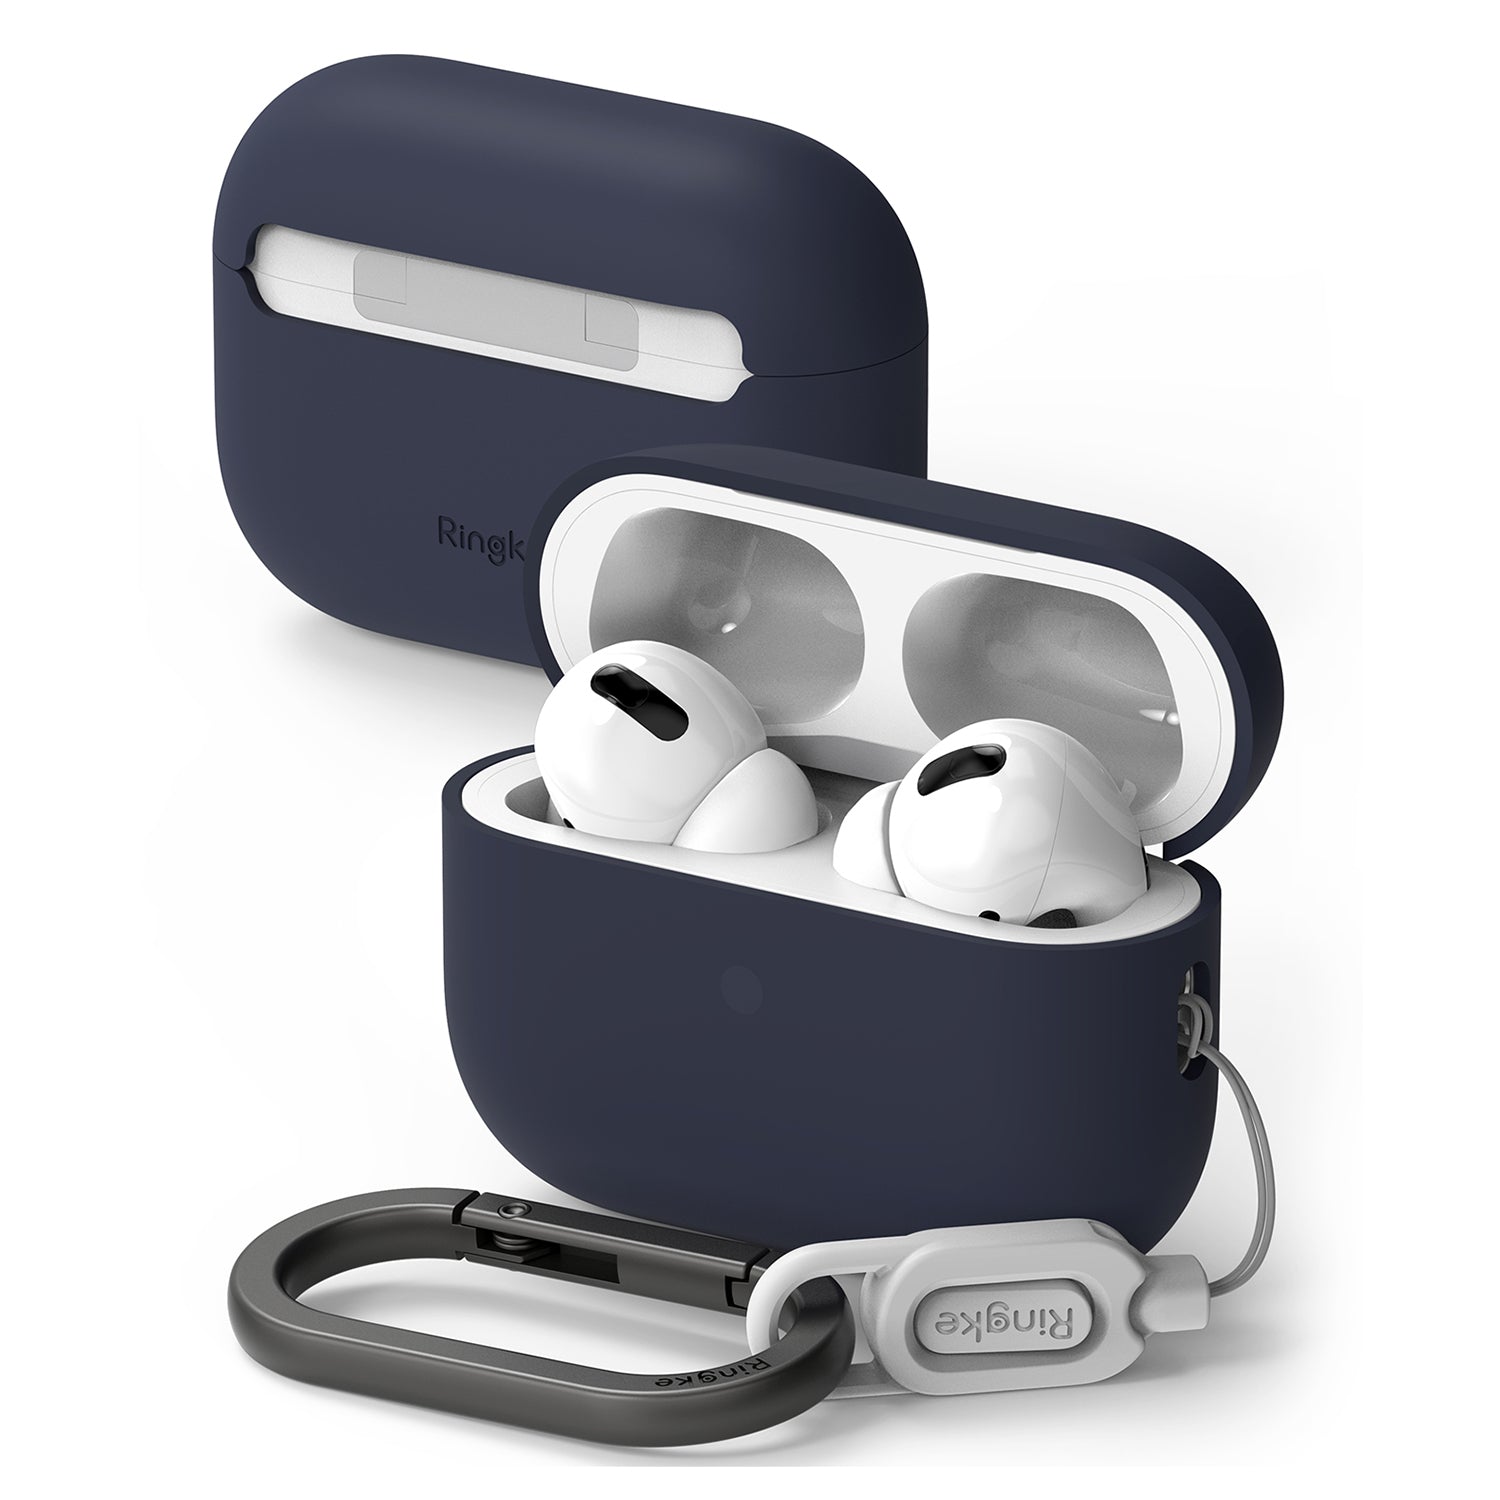  Ringke Silicone Case for AirPods Pro 2 AirPods Case Ringke Midnight Blue 